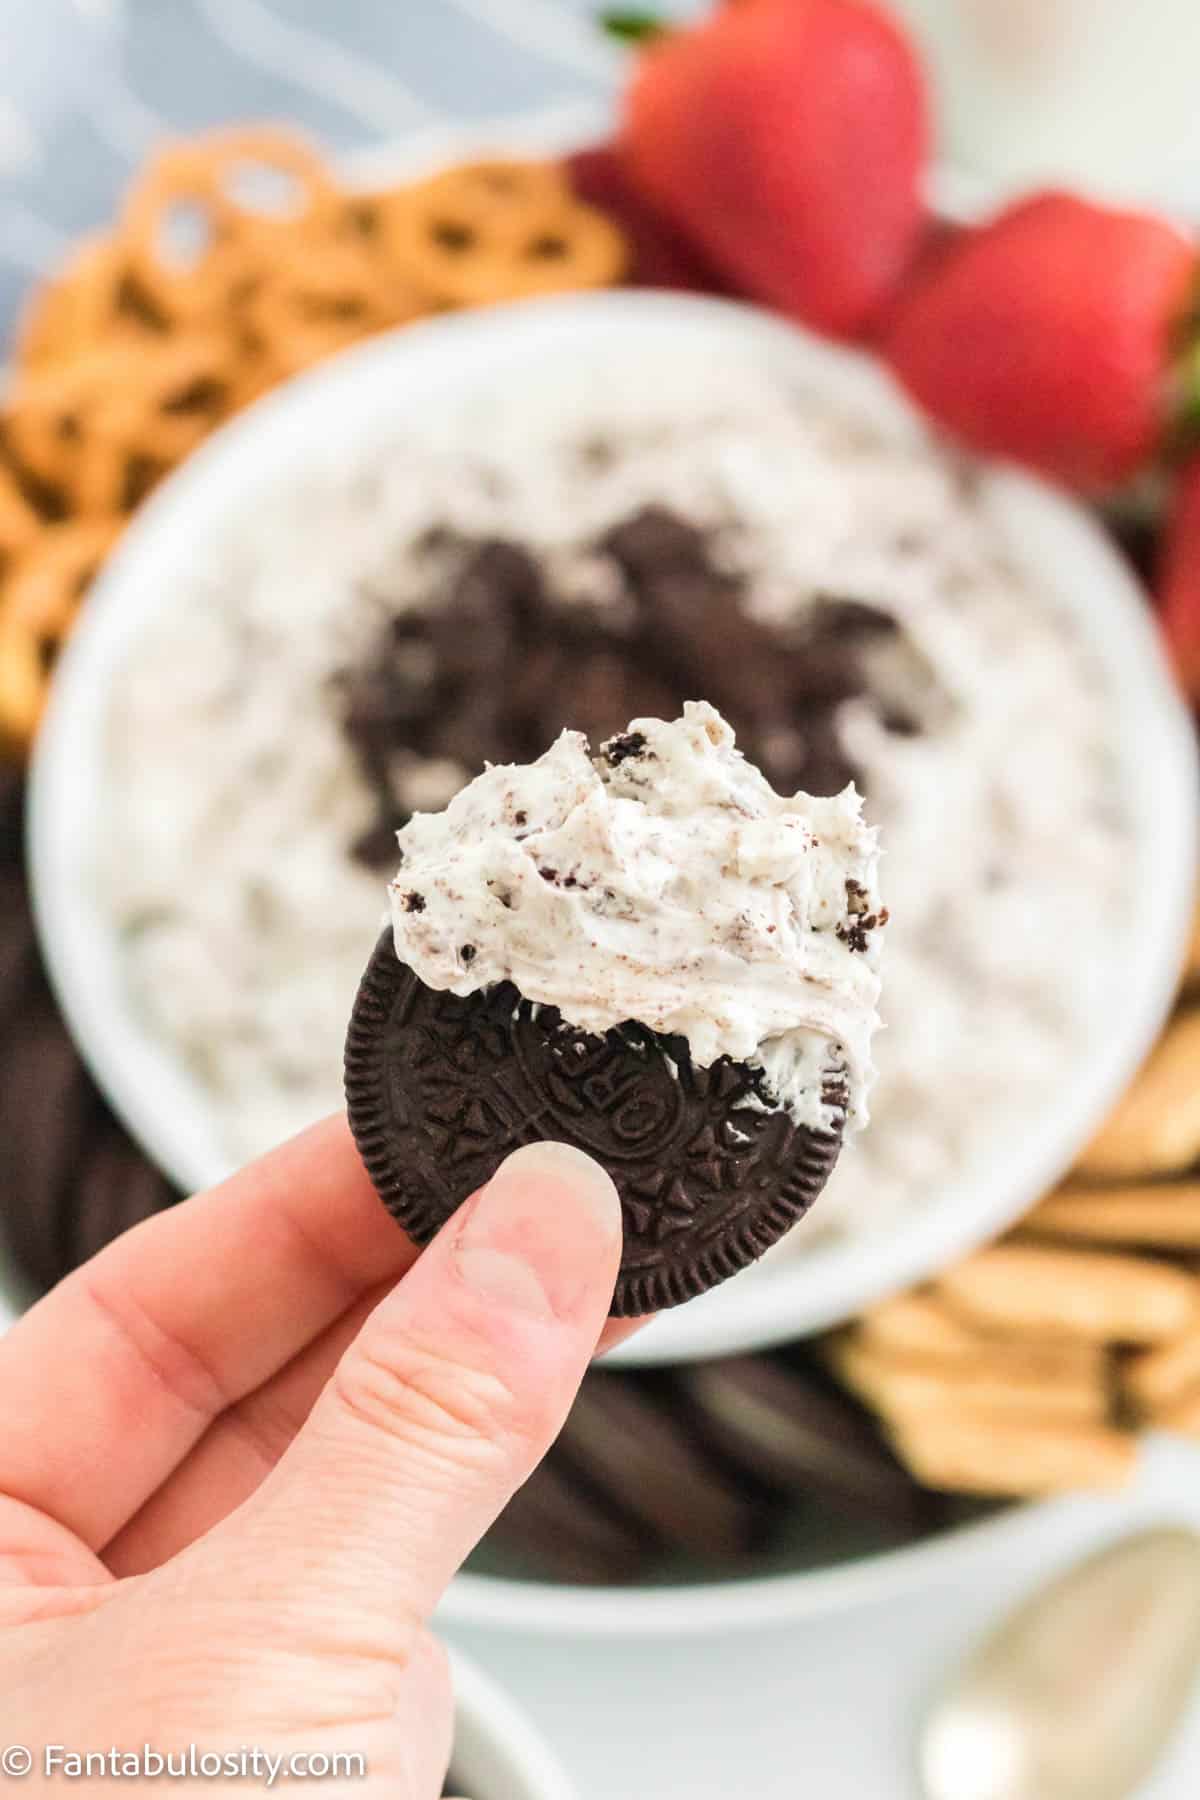 Someone holding an Oreo dipped in Oreo dip.